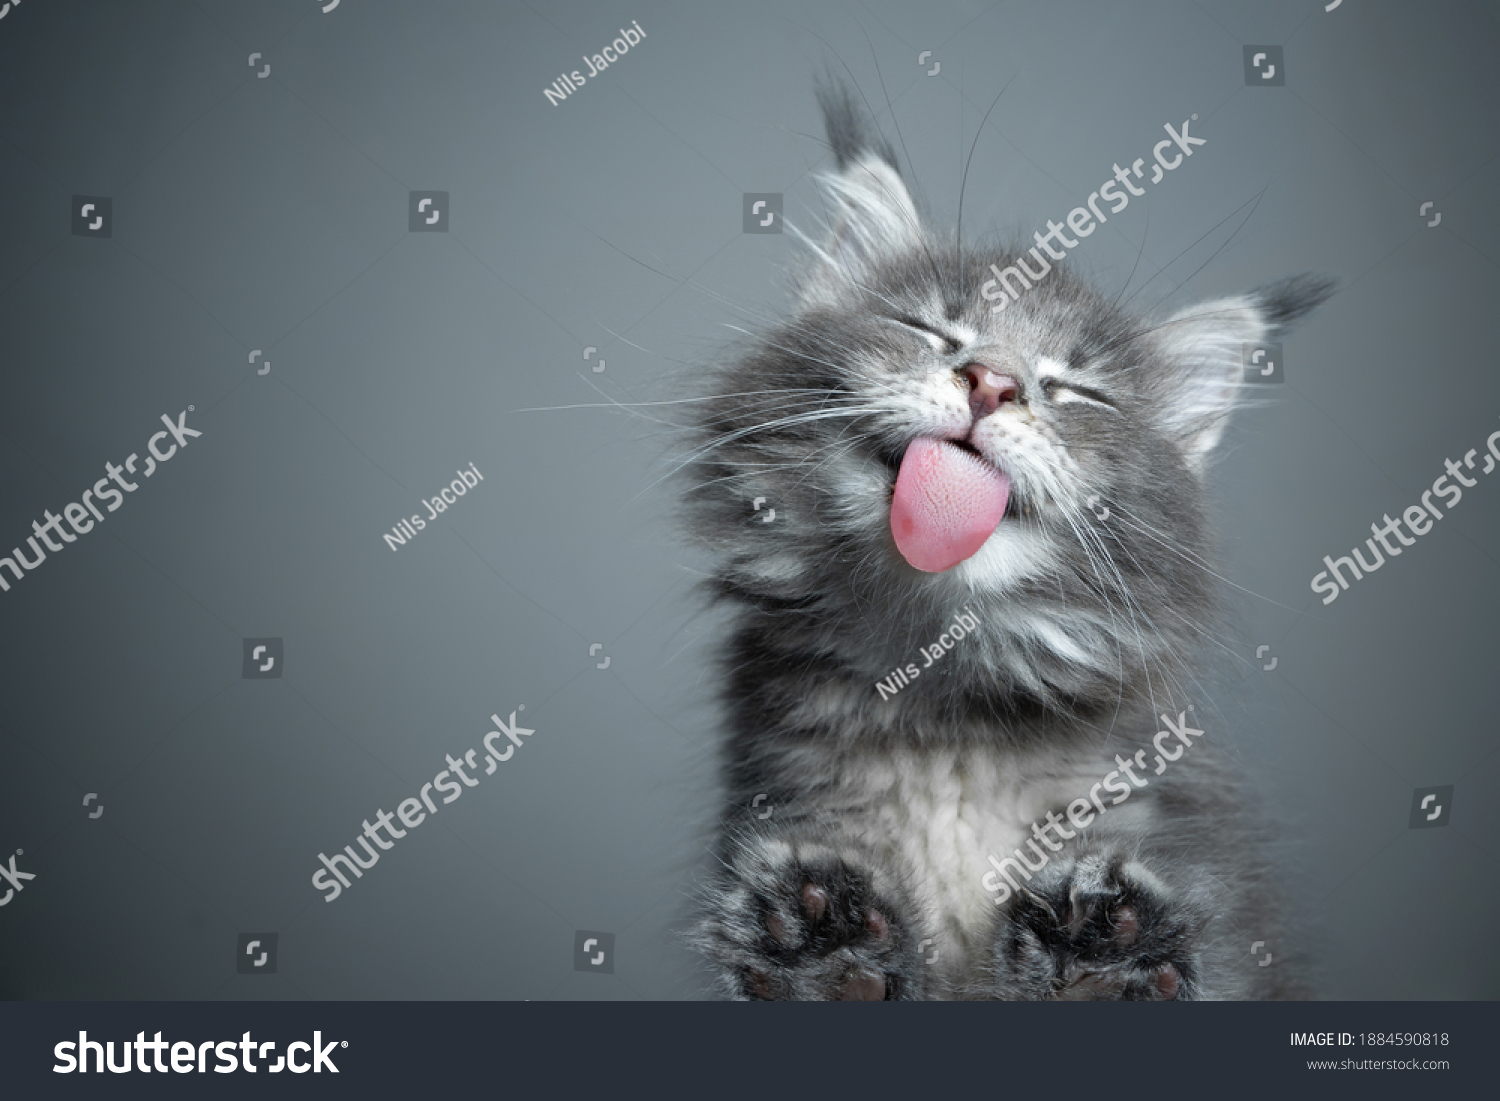 bottom view of a cute blue tabby maine coon kitten licking glass table on gray background with copy space #1884590818